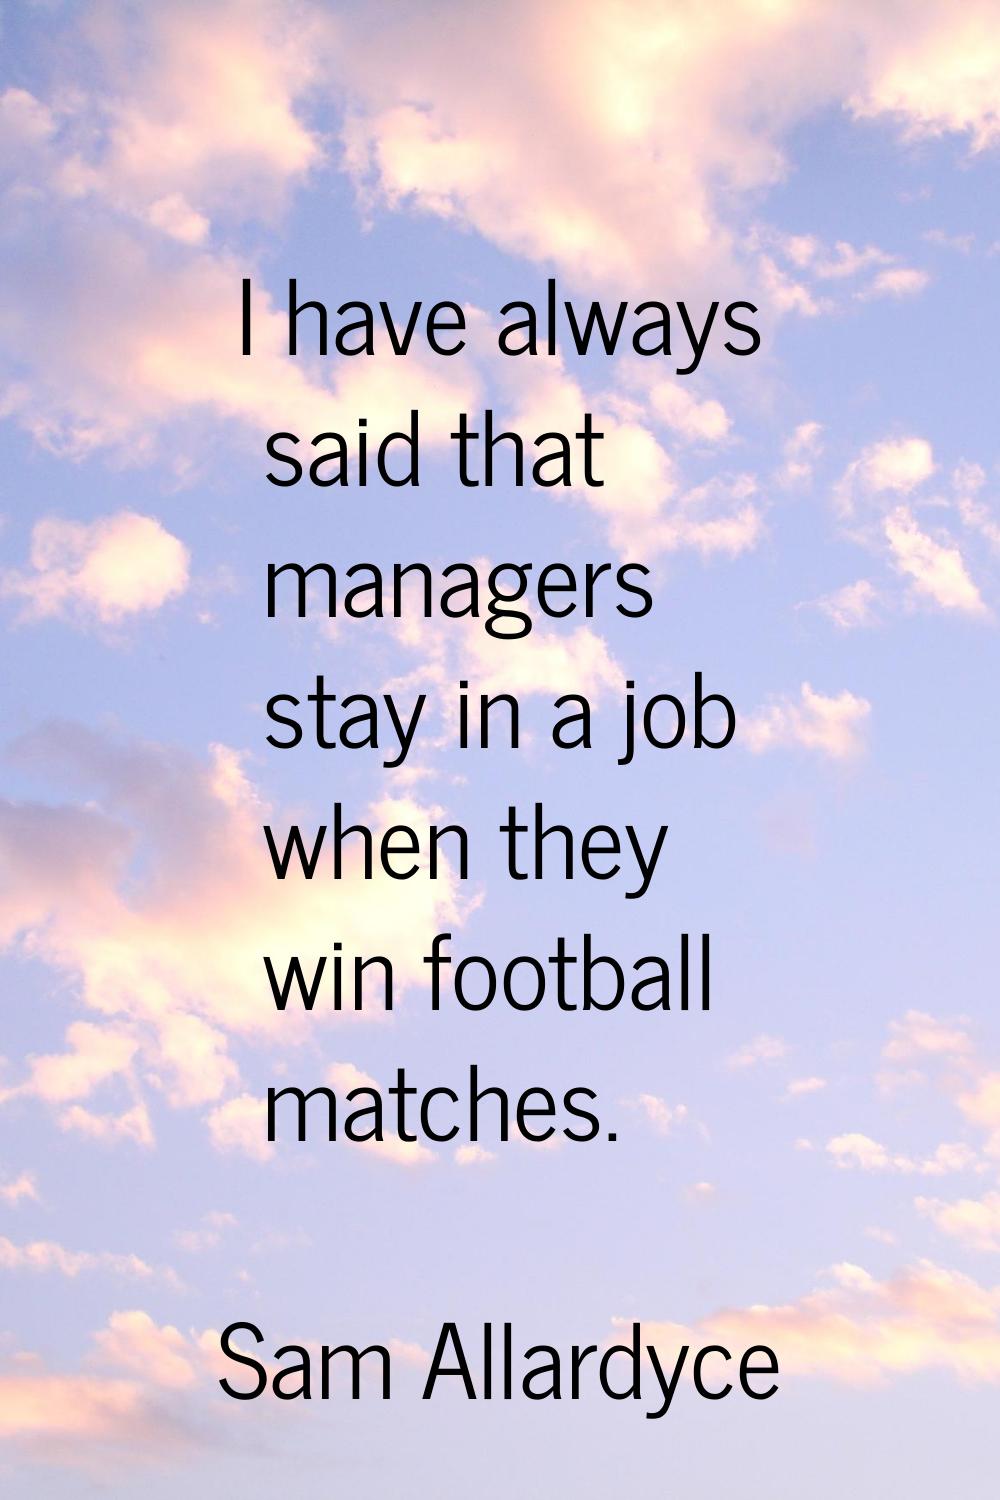 I have always said that managers stay in a job when they win football matches.